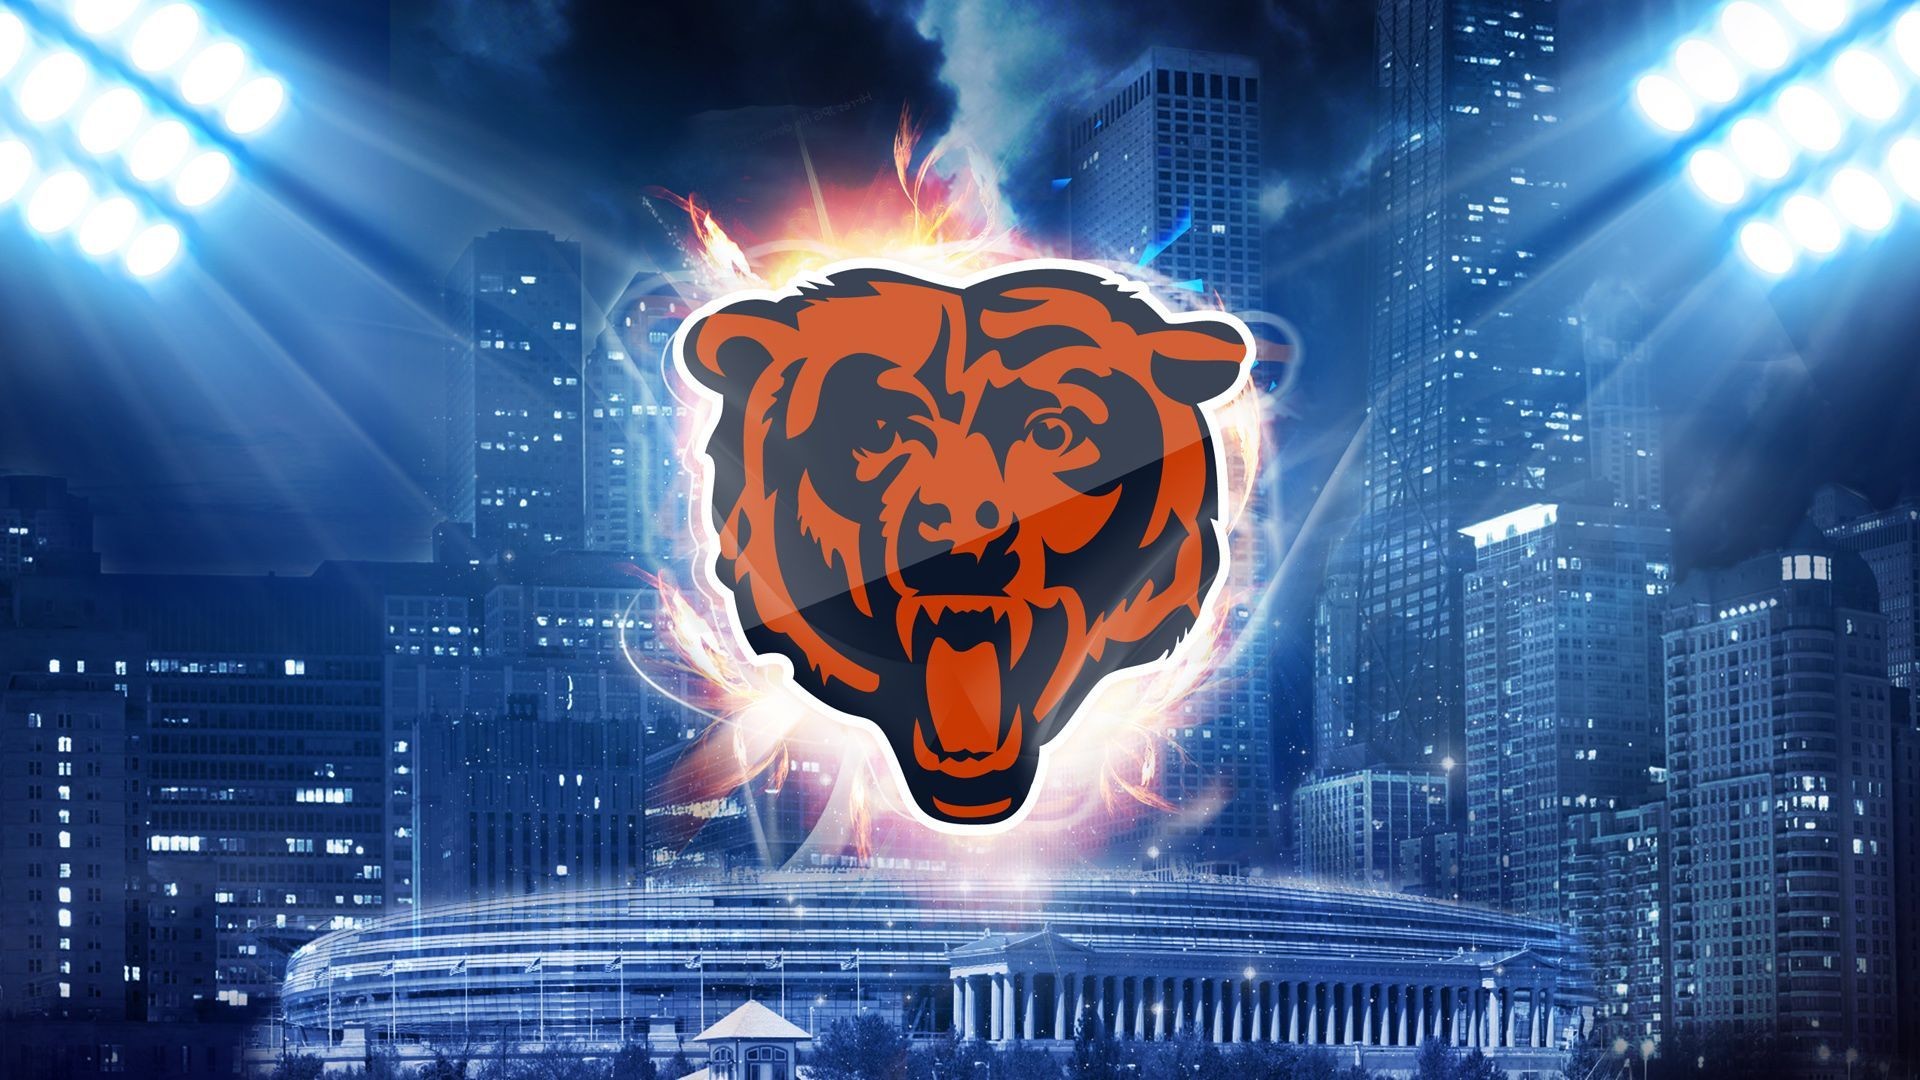 1920x1080 Chicago Bear Images